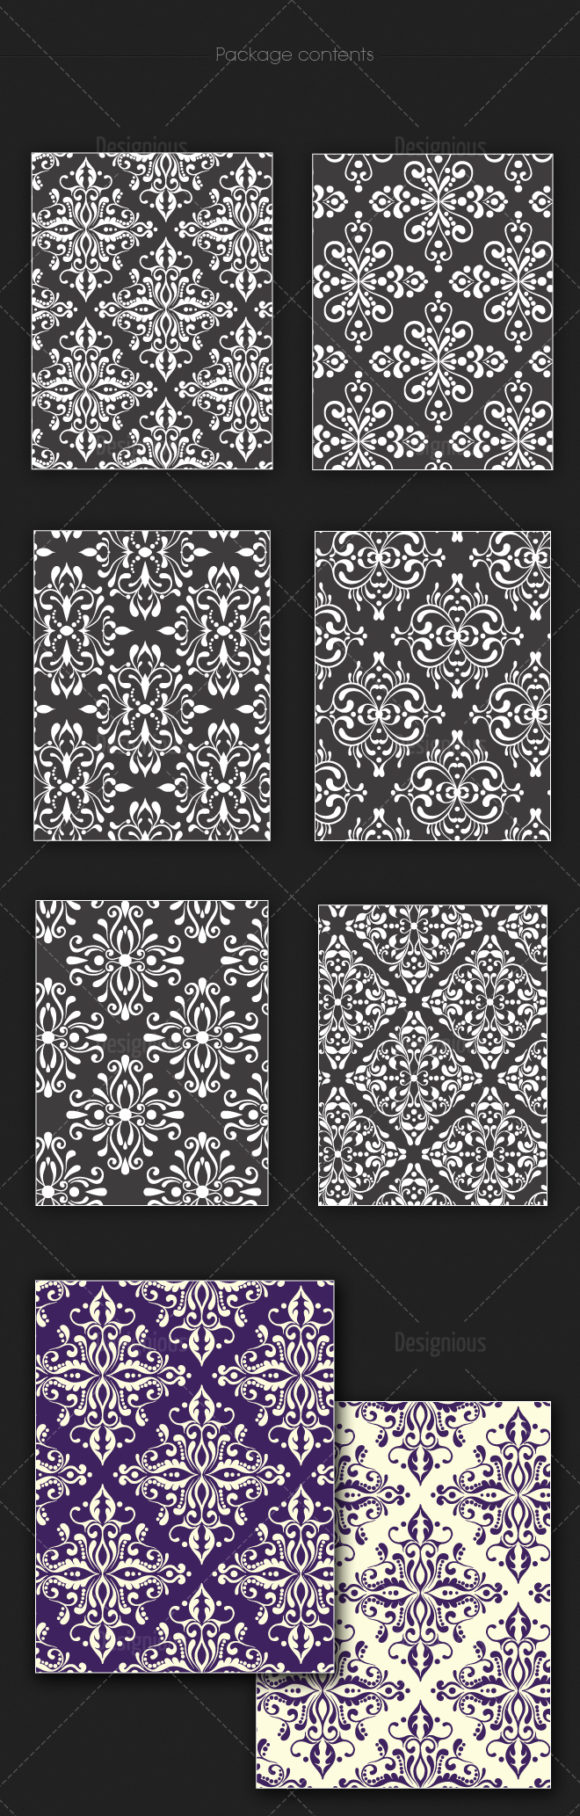 Seamless Patterns Vector Pack 126 2